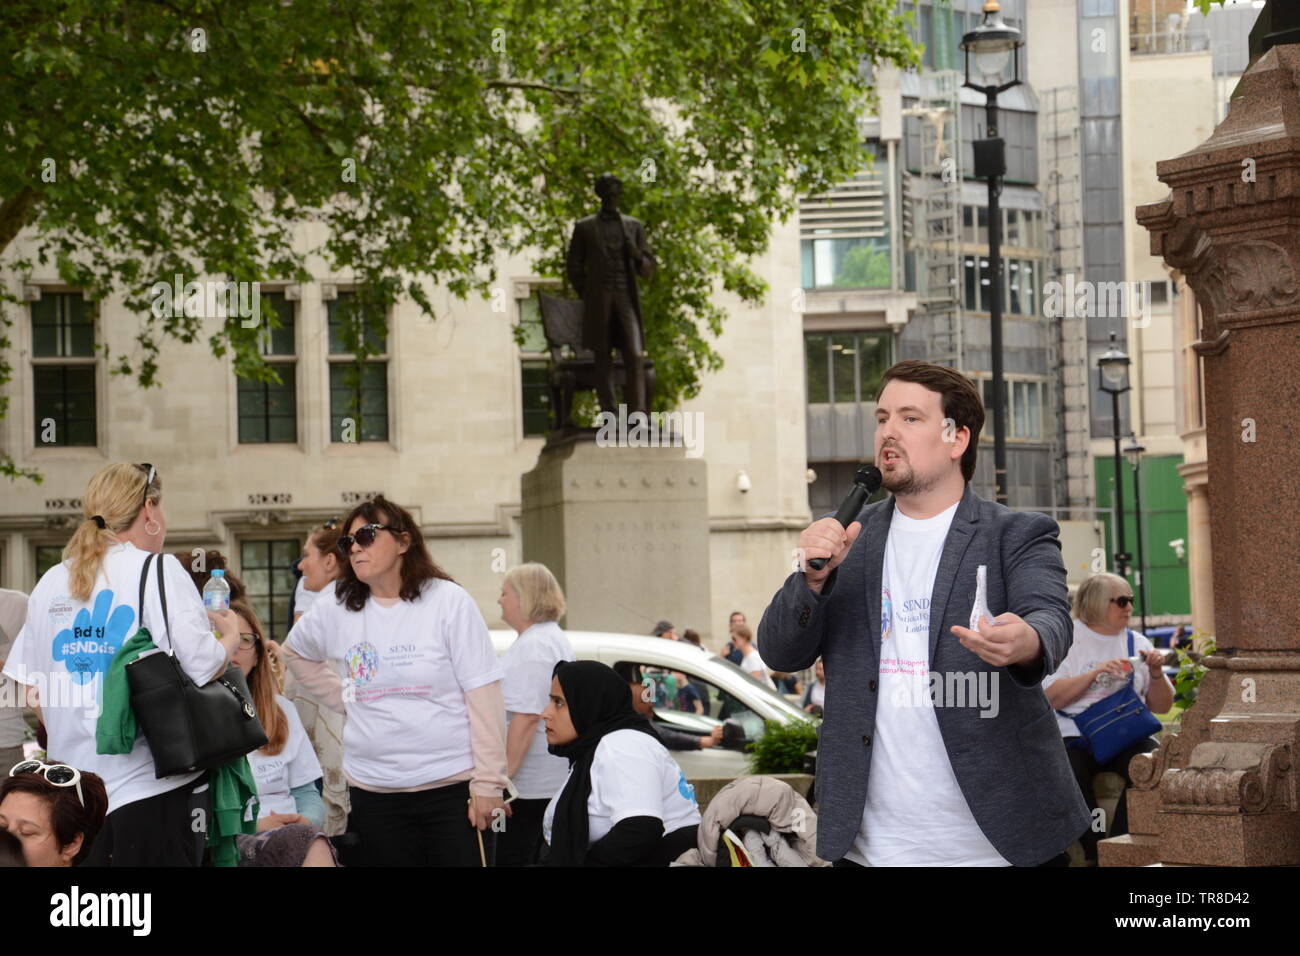 SEND National Crisis held a rally at Parliament Sq after delivering a petition to 10 Downing on Thursday 30th May 2019. Stock Photo